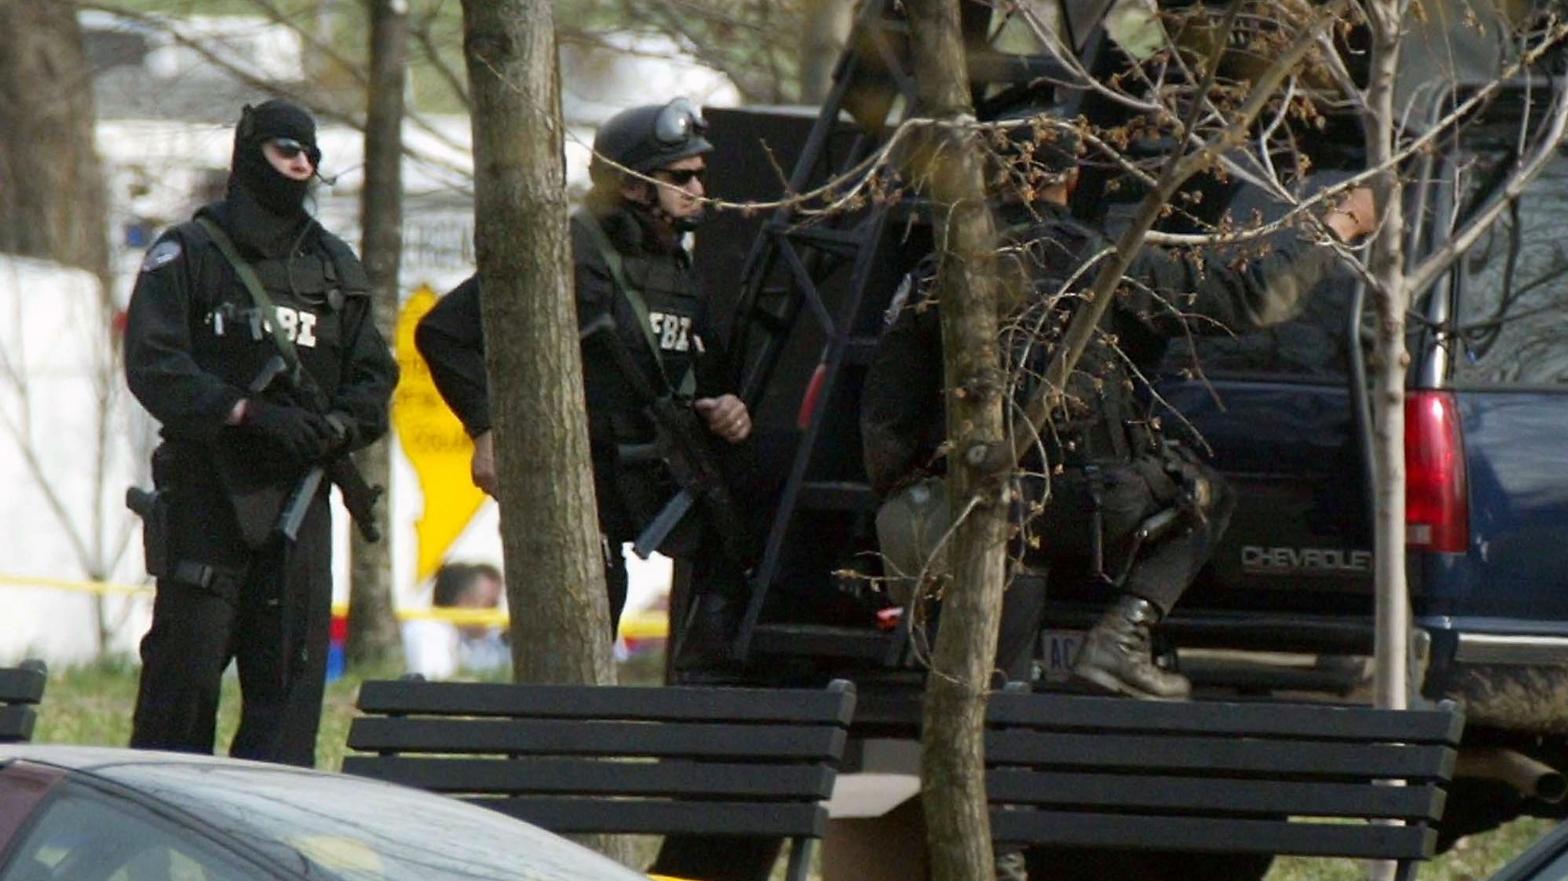 FBI agents with combat gear stand by a vehicle during a standoff with Dwight Watson, a former military policeman of North Carolina, who drove his tractor into a pond at the National Mall March 18, 2003 in Washington, DC (Photo: Alex Wong, Getty Images)